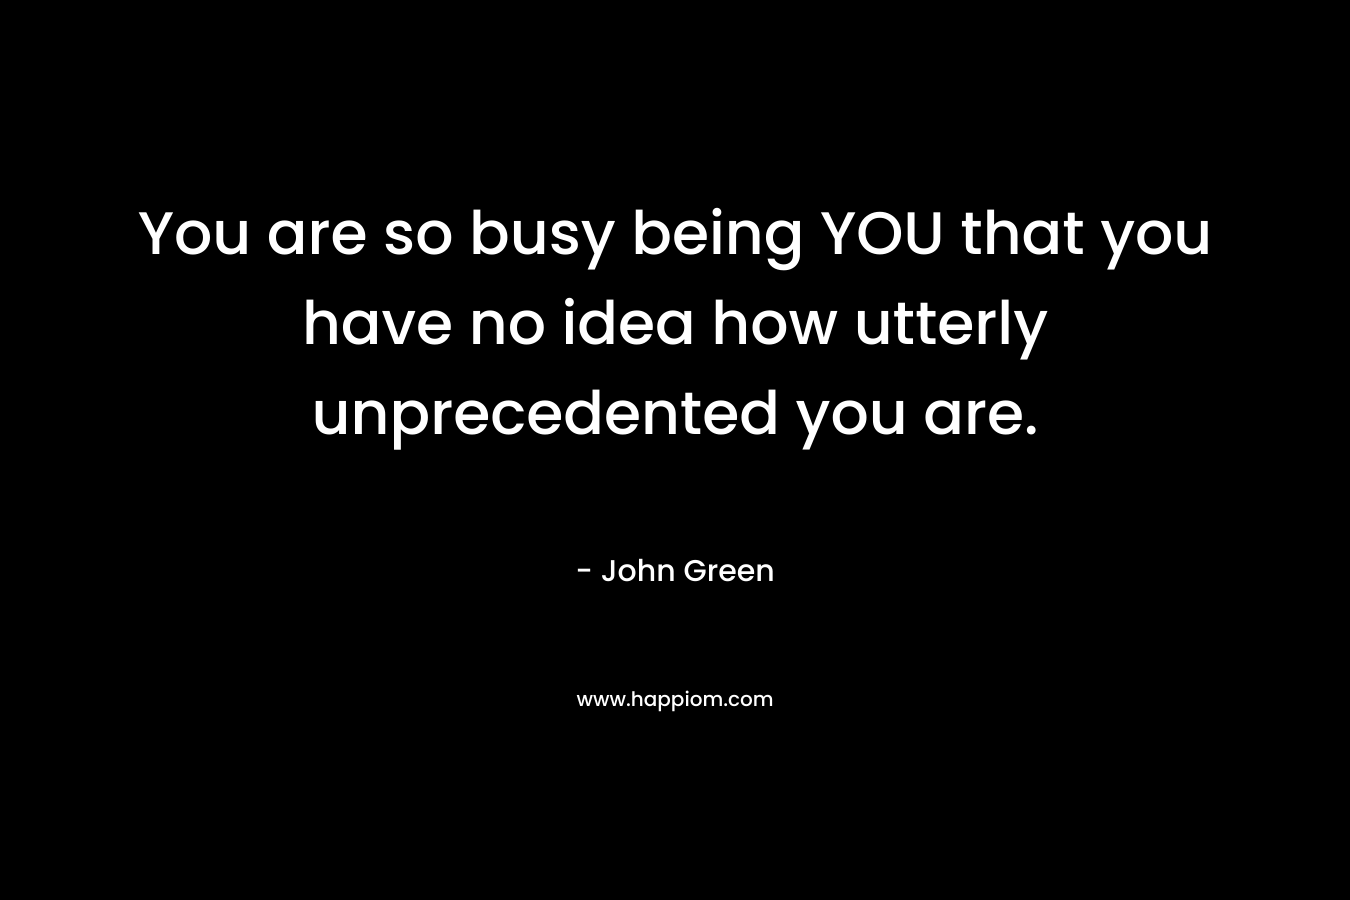 You are so busy being YOU that you have no idea how utterly unprecedented you are. – John Green